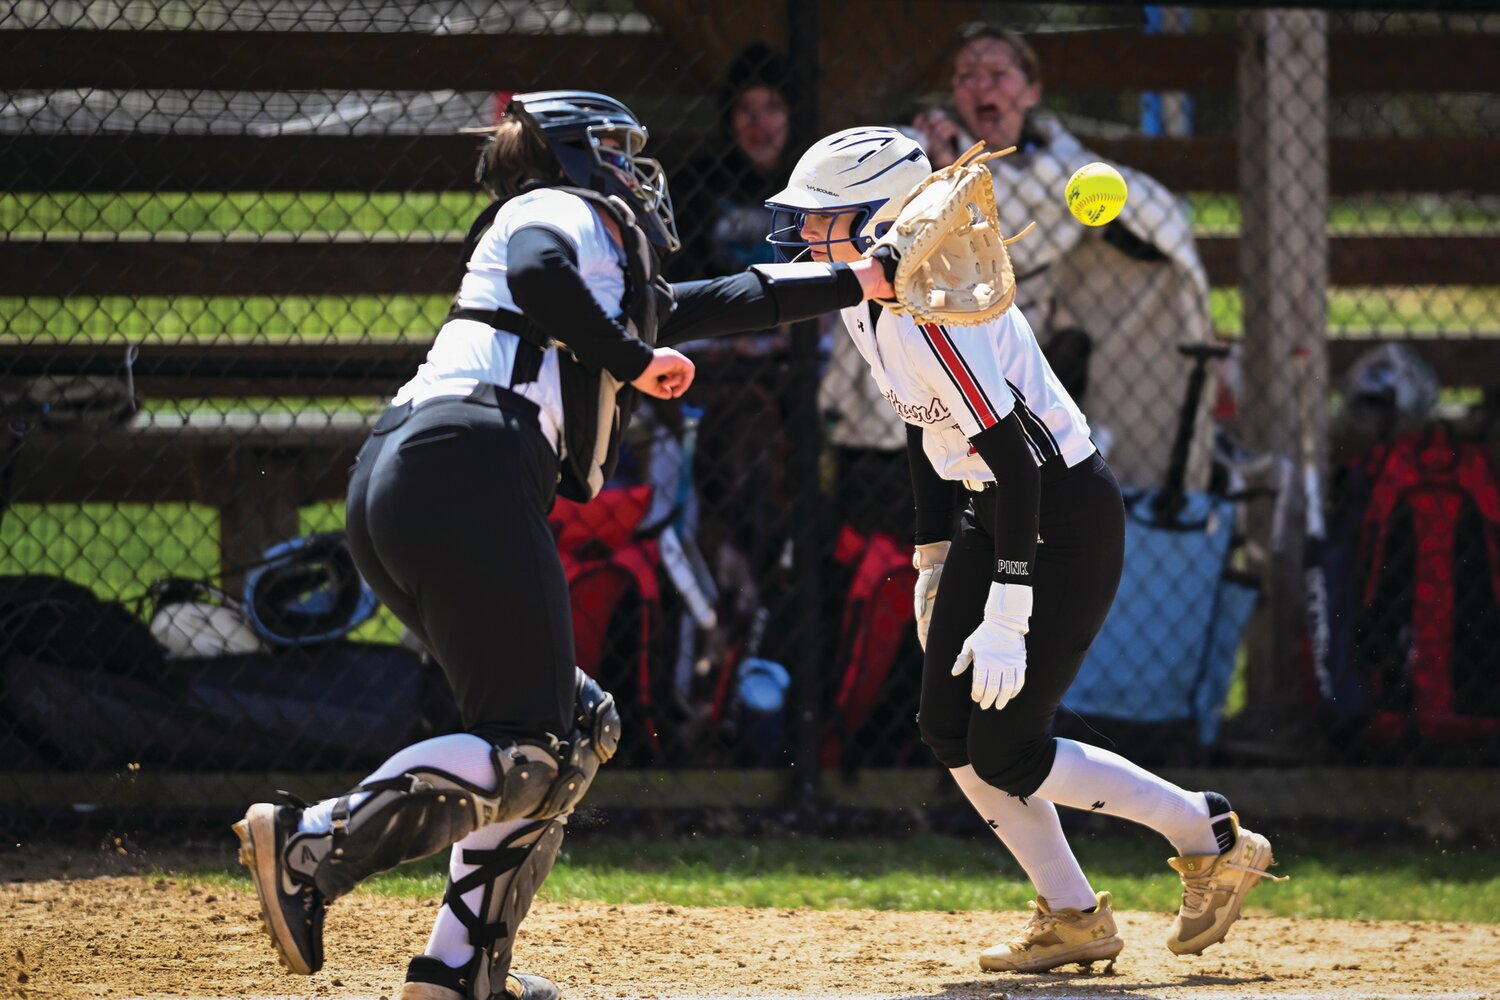 William Tennent’s Madison Pirolli avoids Archbishop Wood catcher Sophia Azzarano losing her spike in the process and scoring the game-winning run in the bottom of the sixth inning.